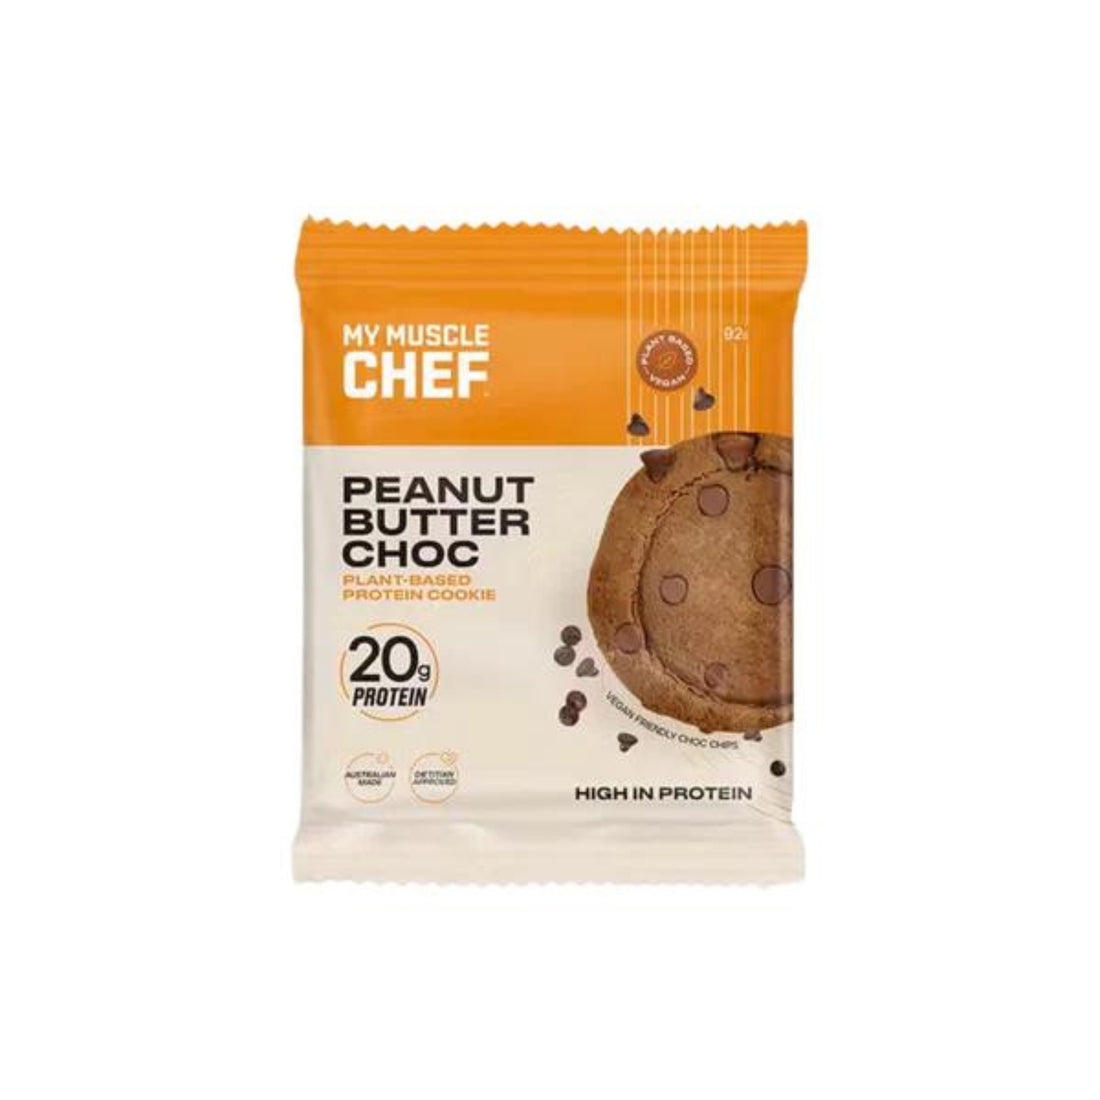 My Muscle Chef Vegan Cookie - Peanut Butter Choc